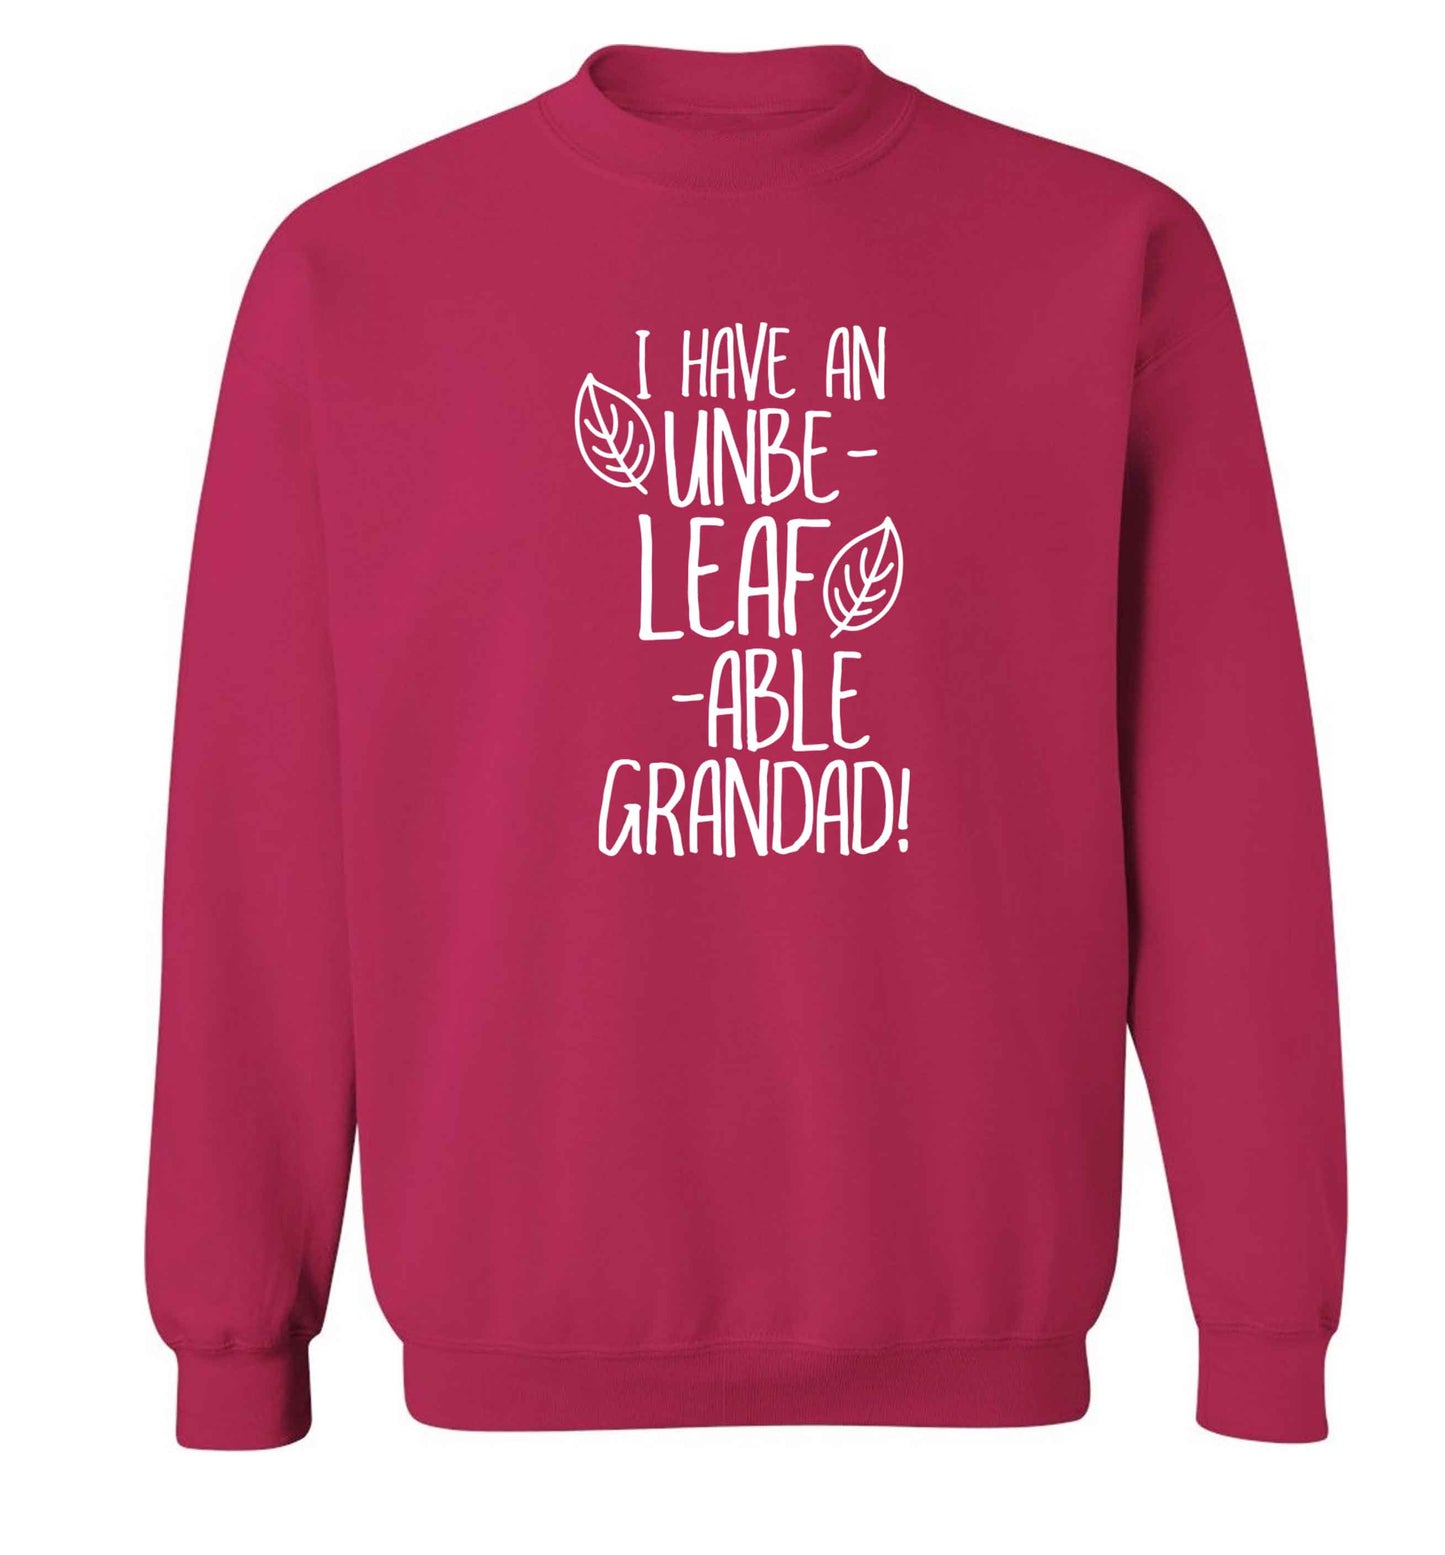 I have an unbe-leaf-able grandad Adult's unisex pink Sweater 2XL